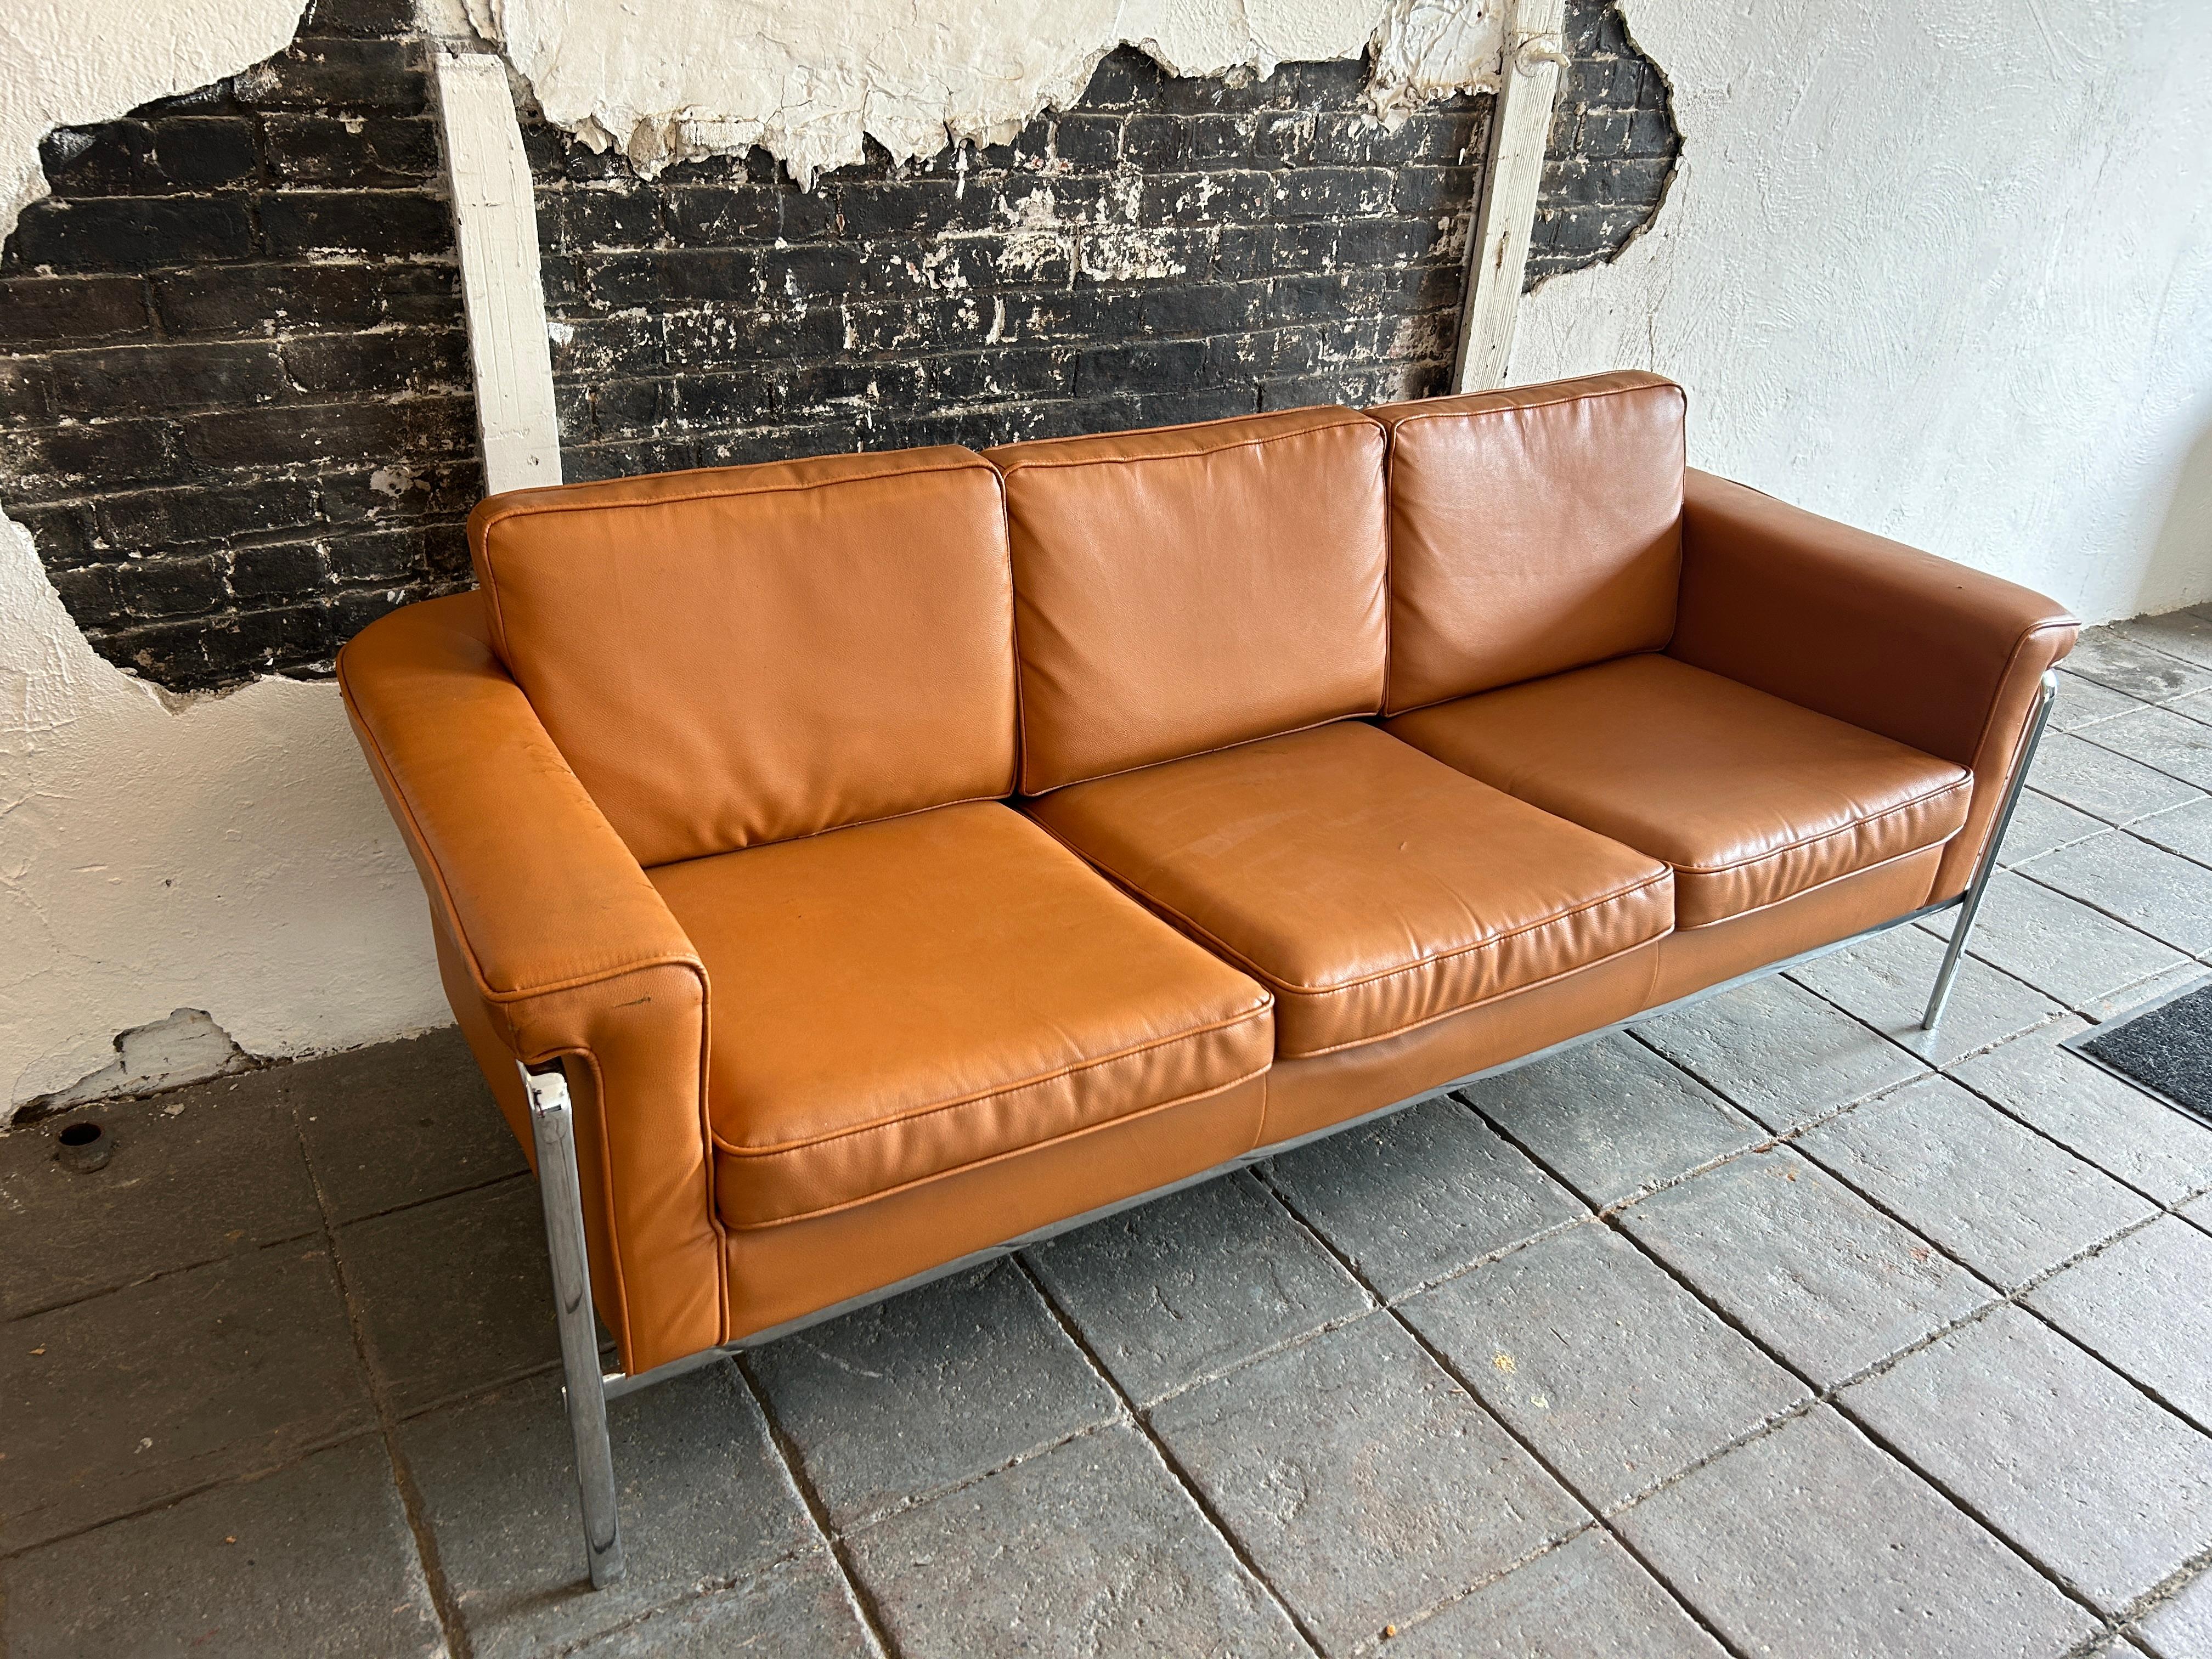 Mid Century Modern 3 seat Tan Leather Chrome frame sofa Style of Horst Brüning. Great Tan leather sofa with Chrome frame with back split leg design. Good vintage condition. Located in Brooklyn NYC.

Dimensions 76